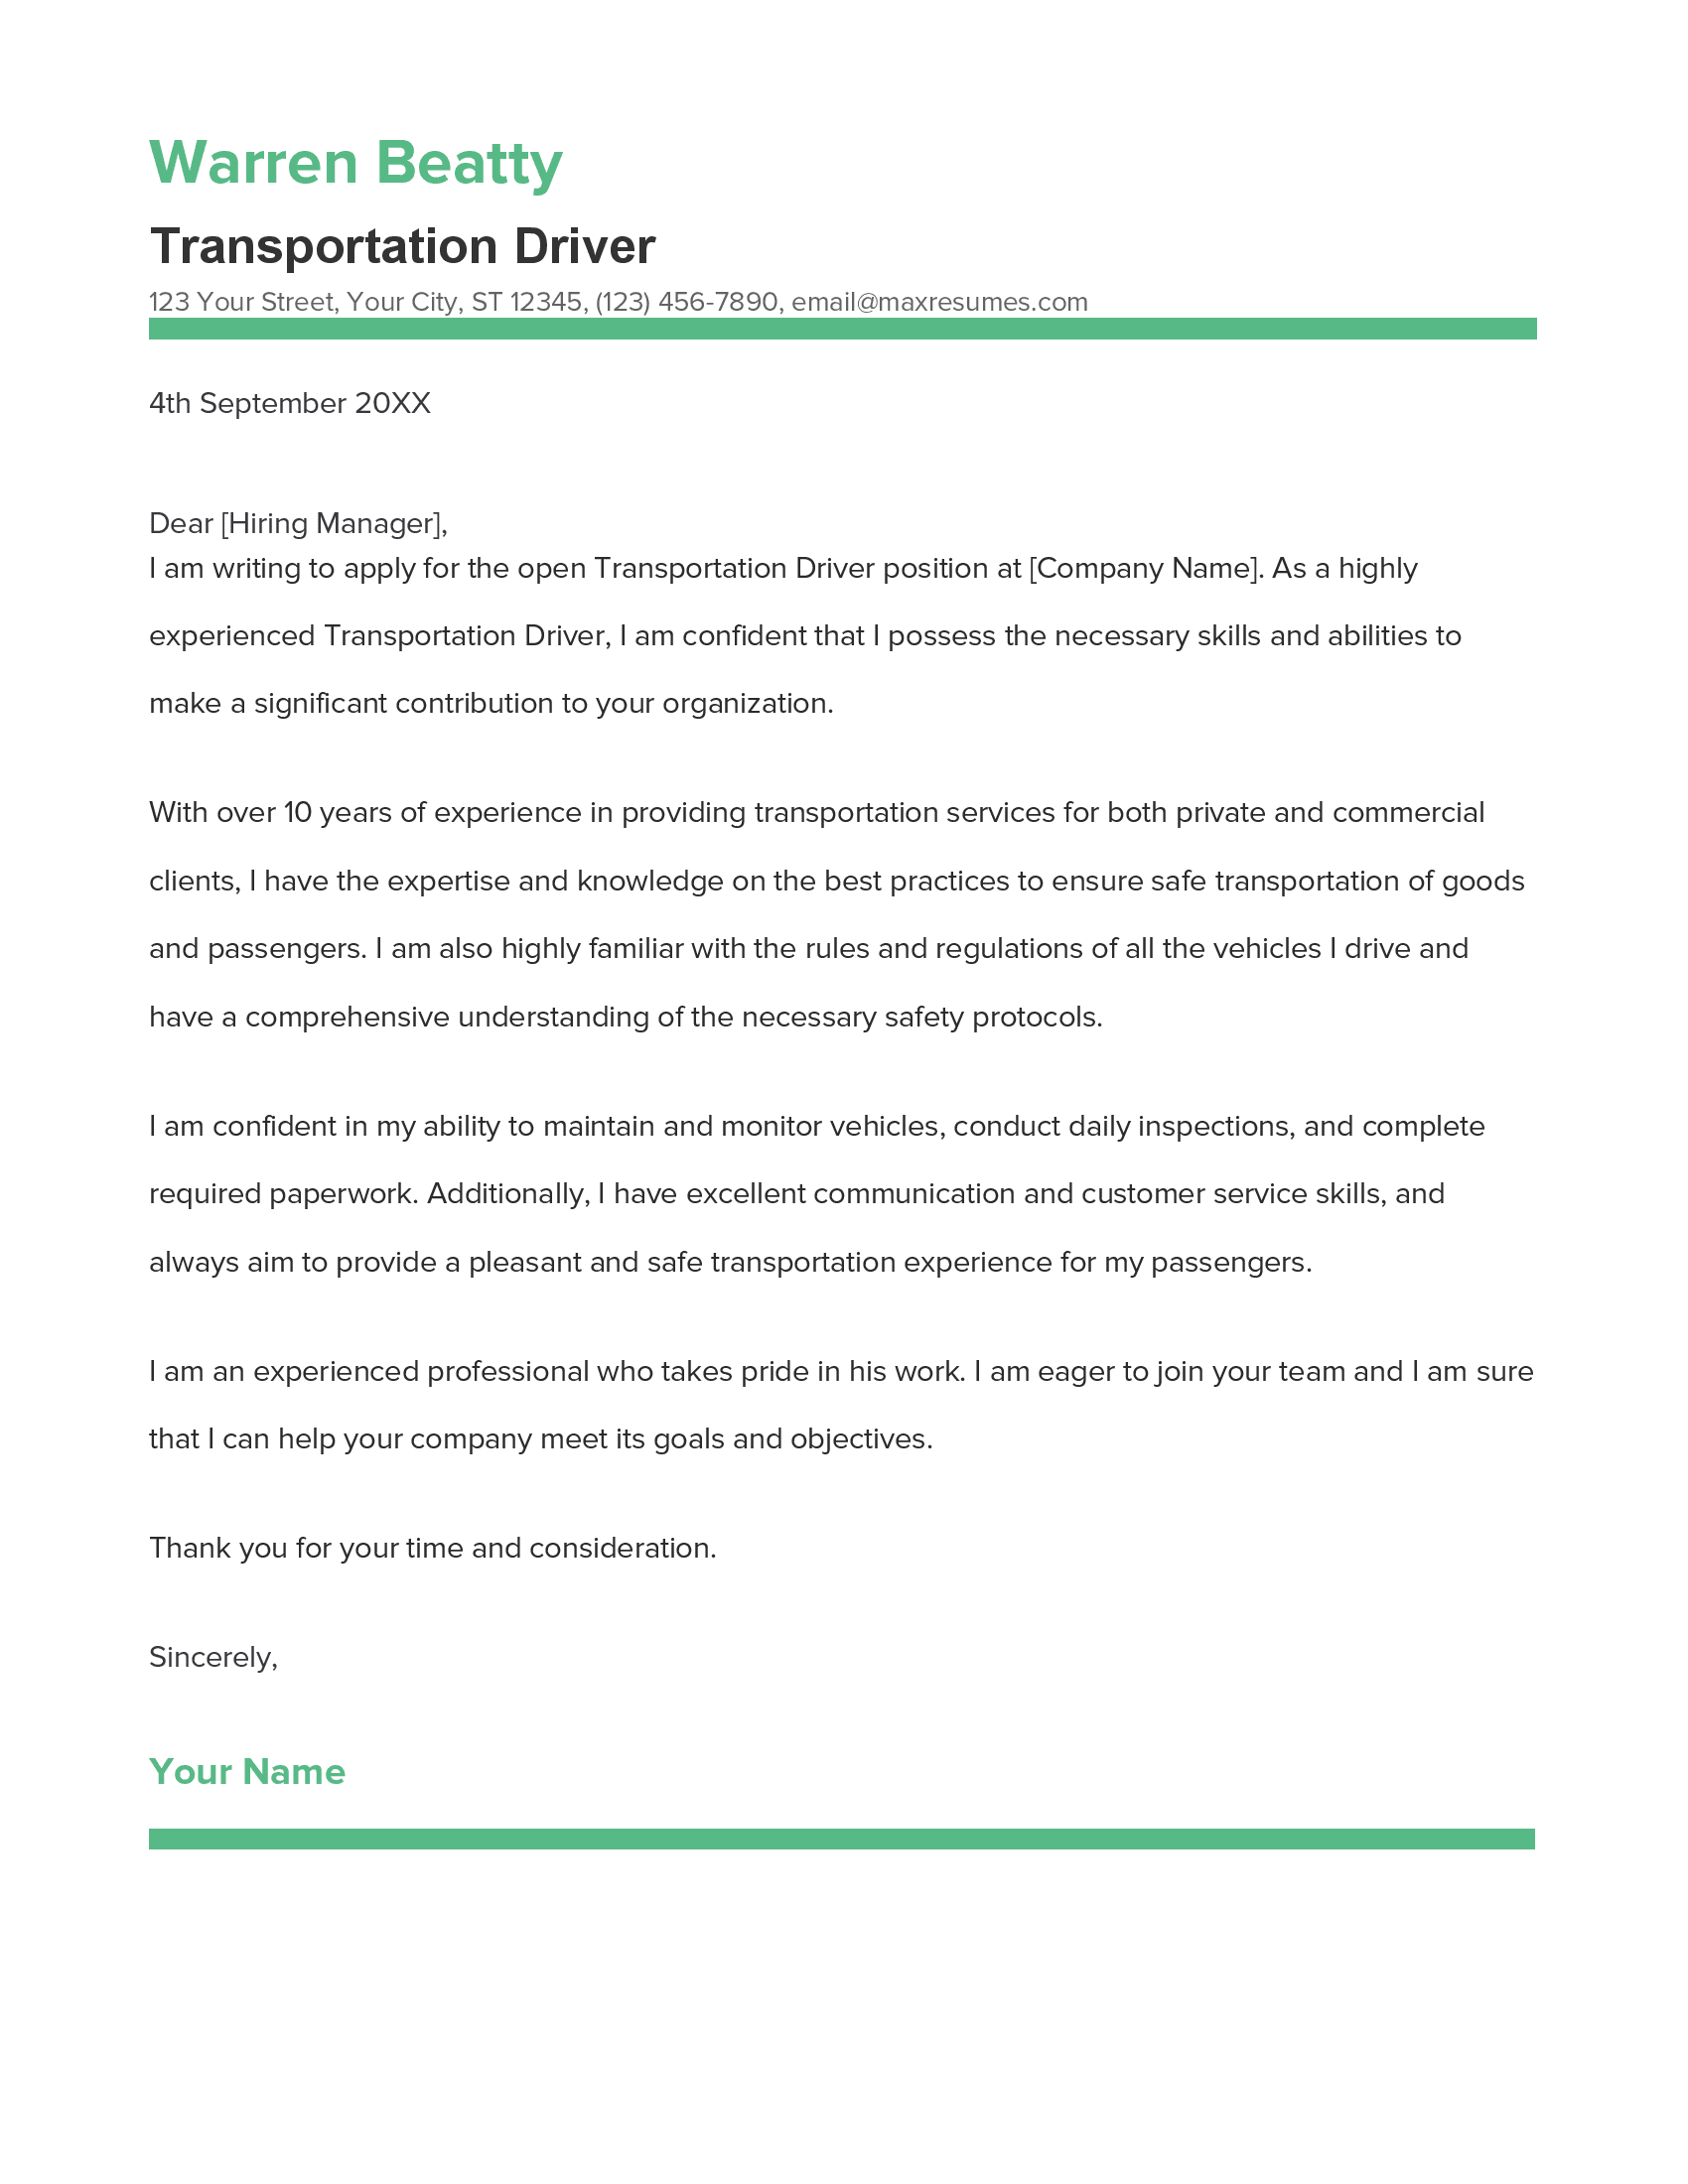 Transportation Driver Cover Letter Example